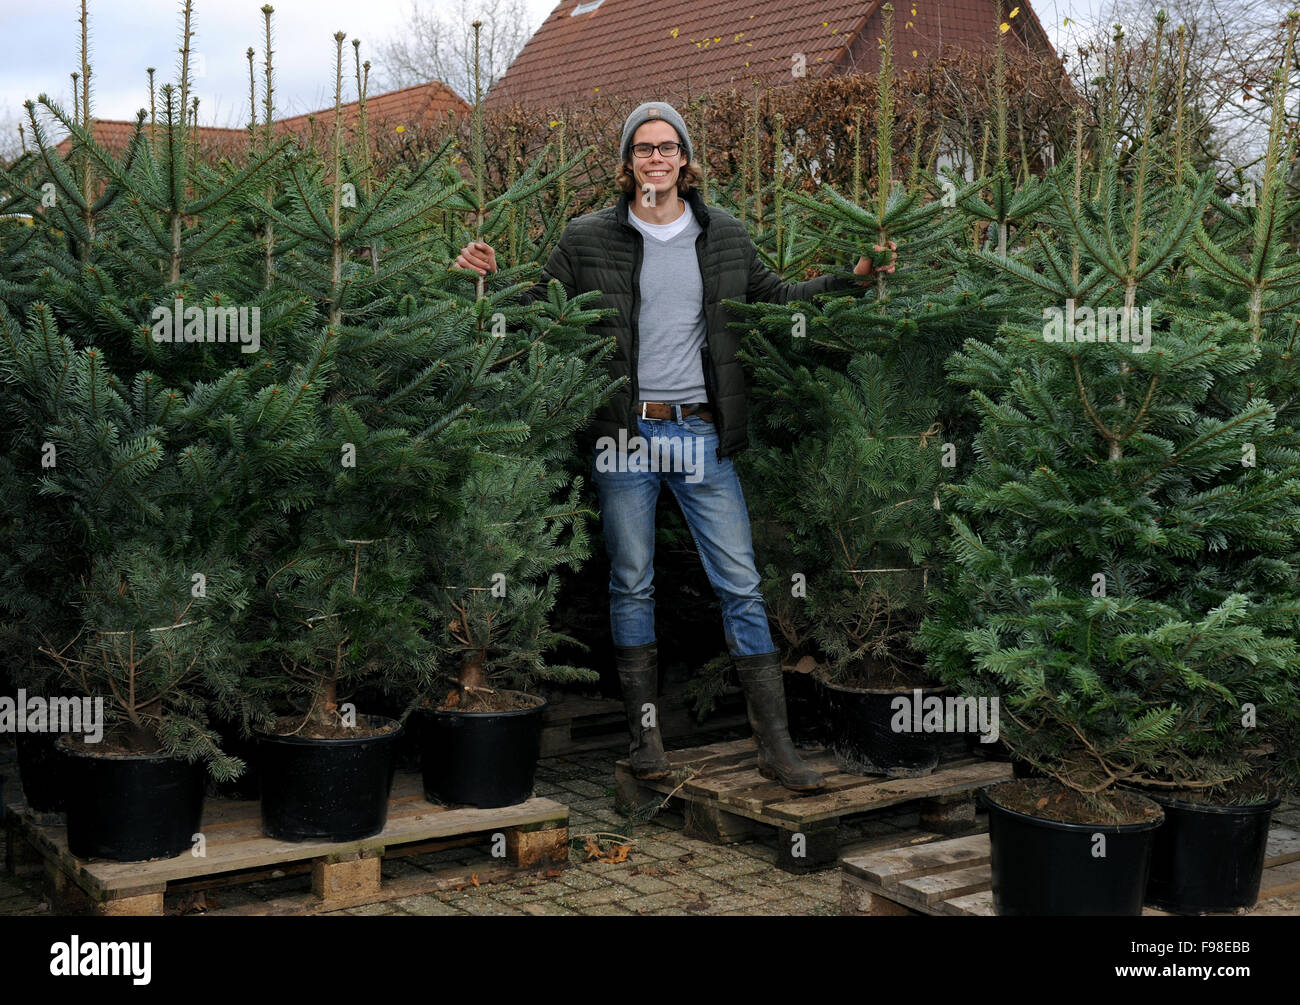 Rastede, Germany. 04th Dec, 2015. Kersten Scholz of the Scholz tree nursery poses next to potted Christmas trees in Rastede, Germany, 04 December 2015. The tree nursery rents out the potted trees. After the holiday season the trees are collected and replanted to make the Christmas tree business more sustainable. Photo: Ingo Wagner/dpa/Alamy Live News Stock Photo